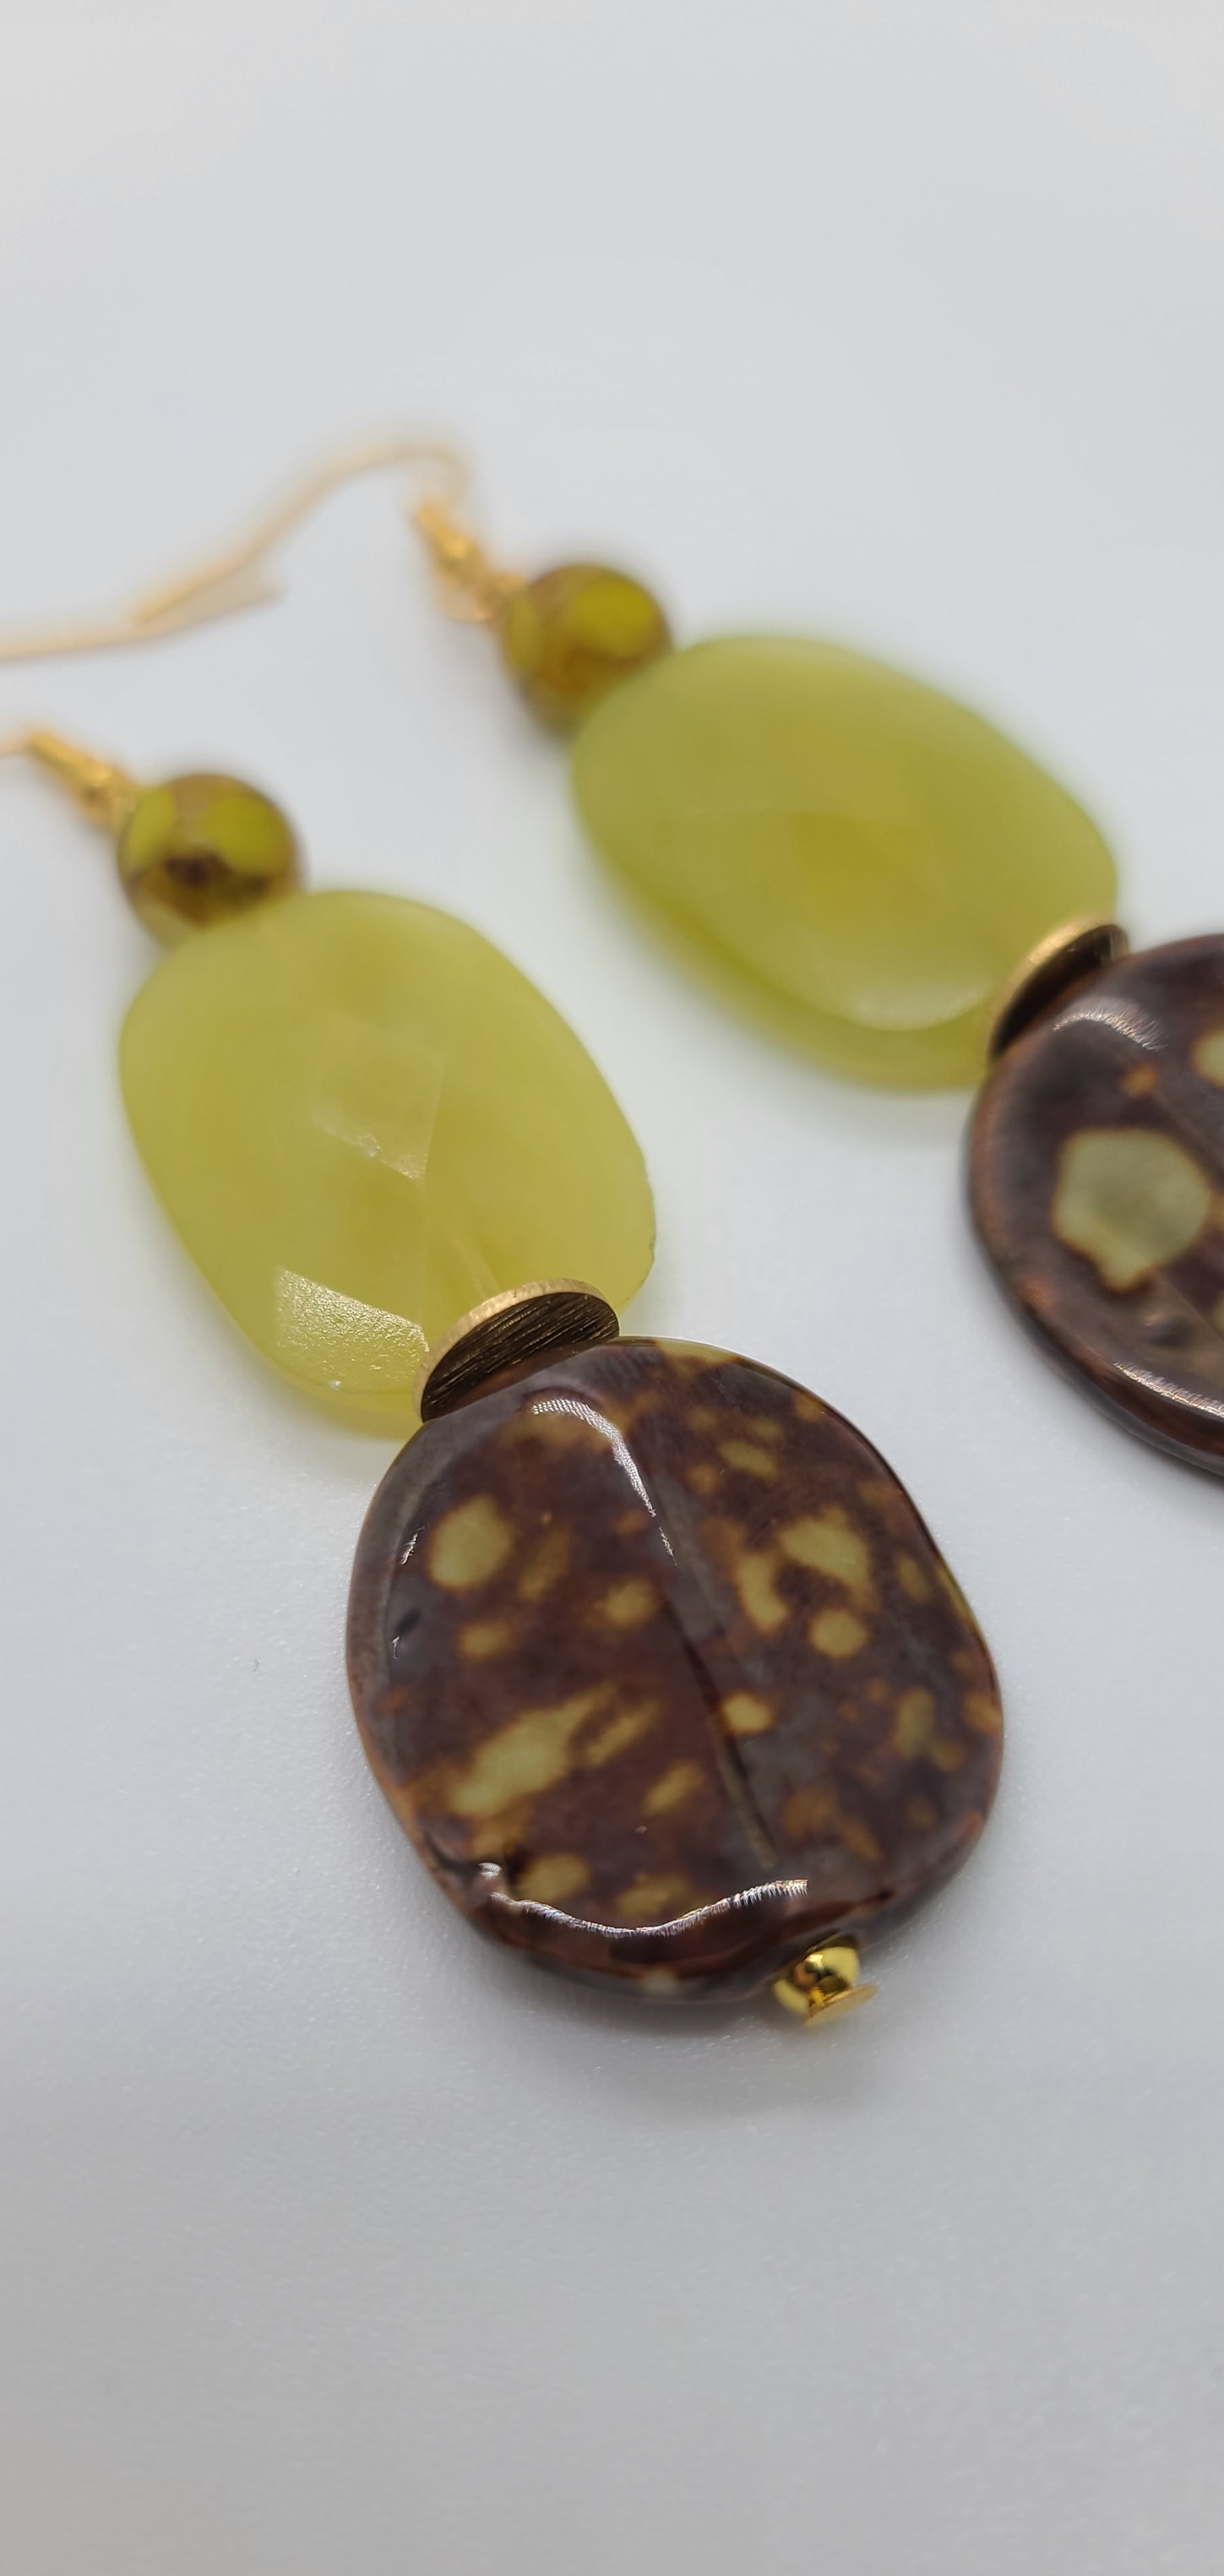 Length: 3 inches | Weight: 0.7 ounces  Distinctly You! These earrings are made with brown and gold print ceramic stones, citron green glass faceted stones, 8mm brown and green matte colored faceted glass beads, gold seed beads, and gold rondelles.